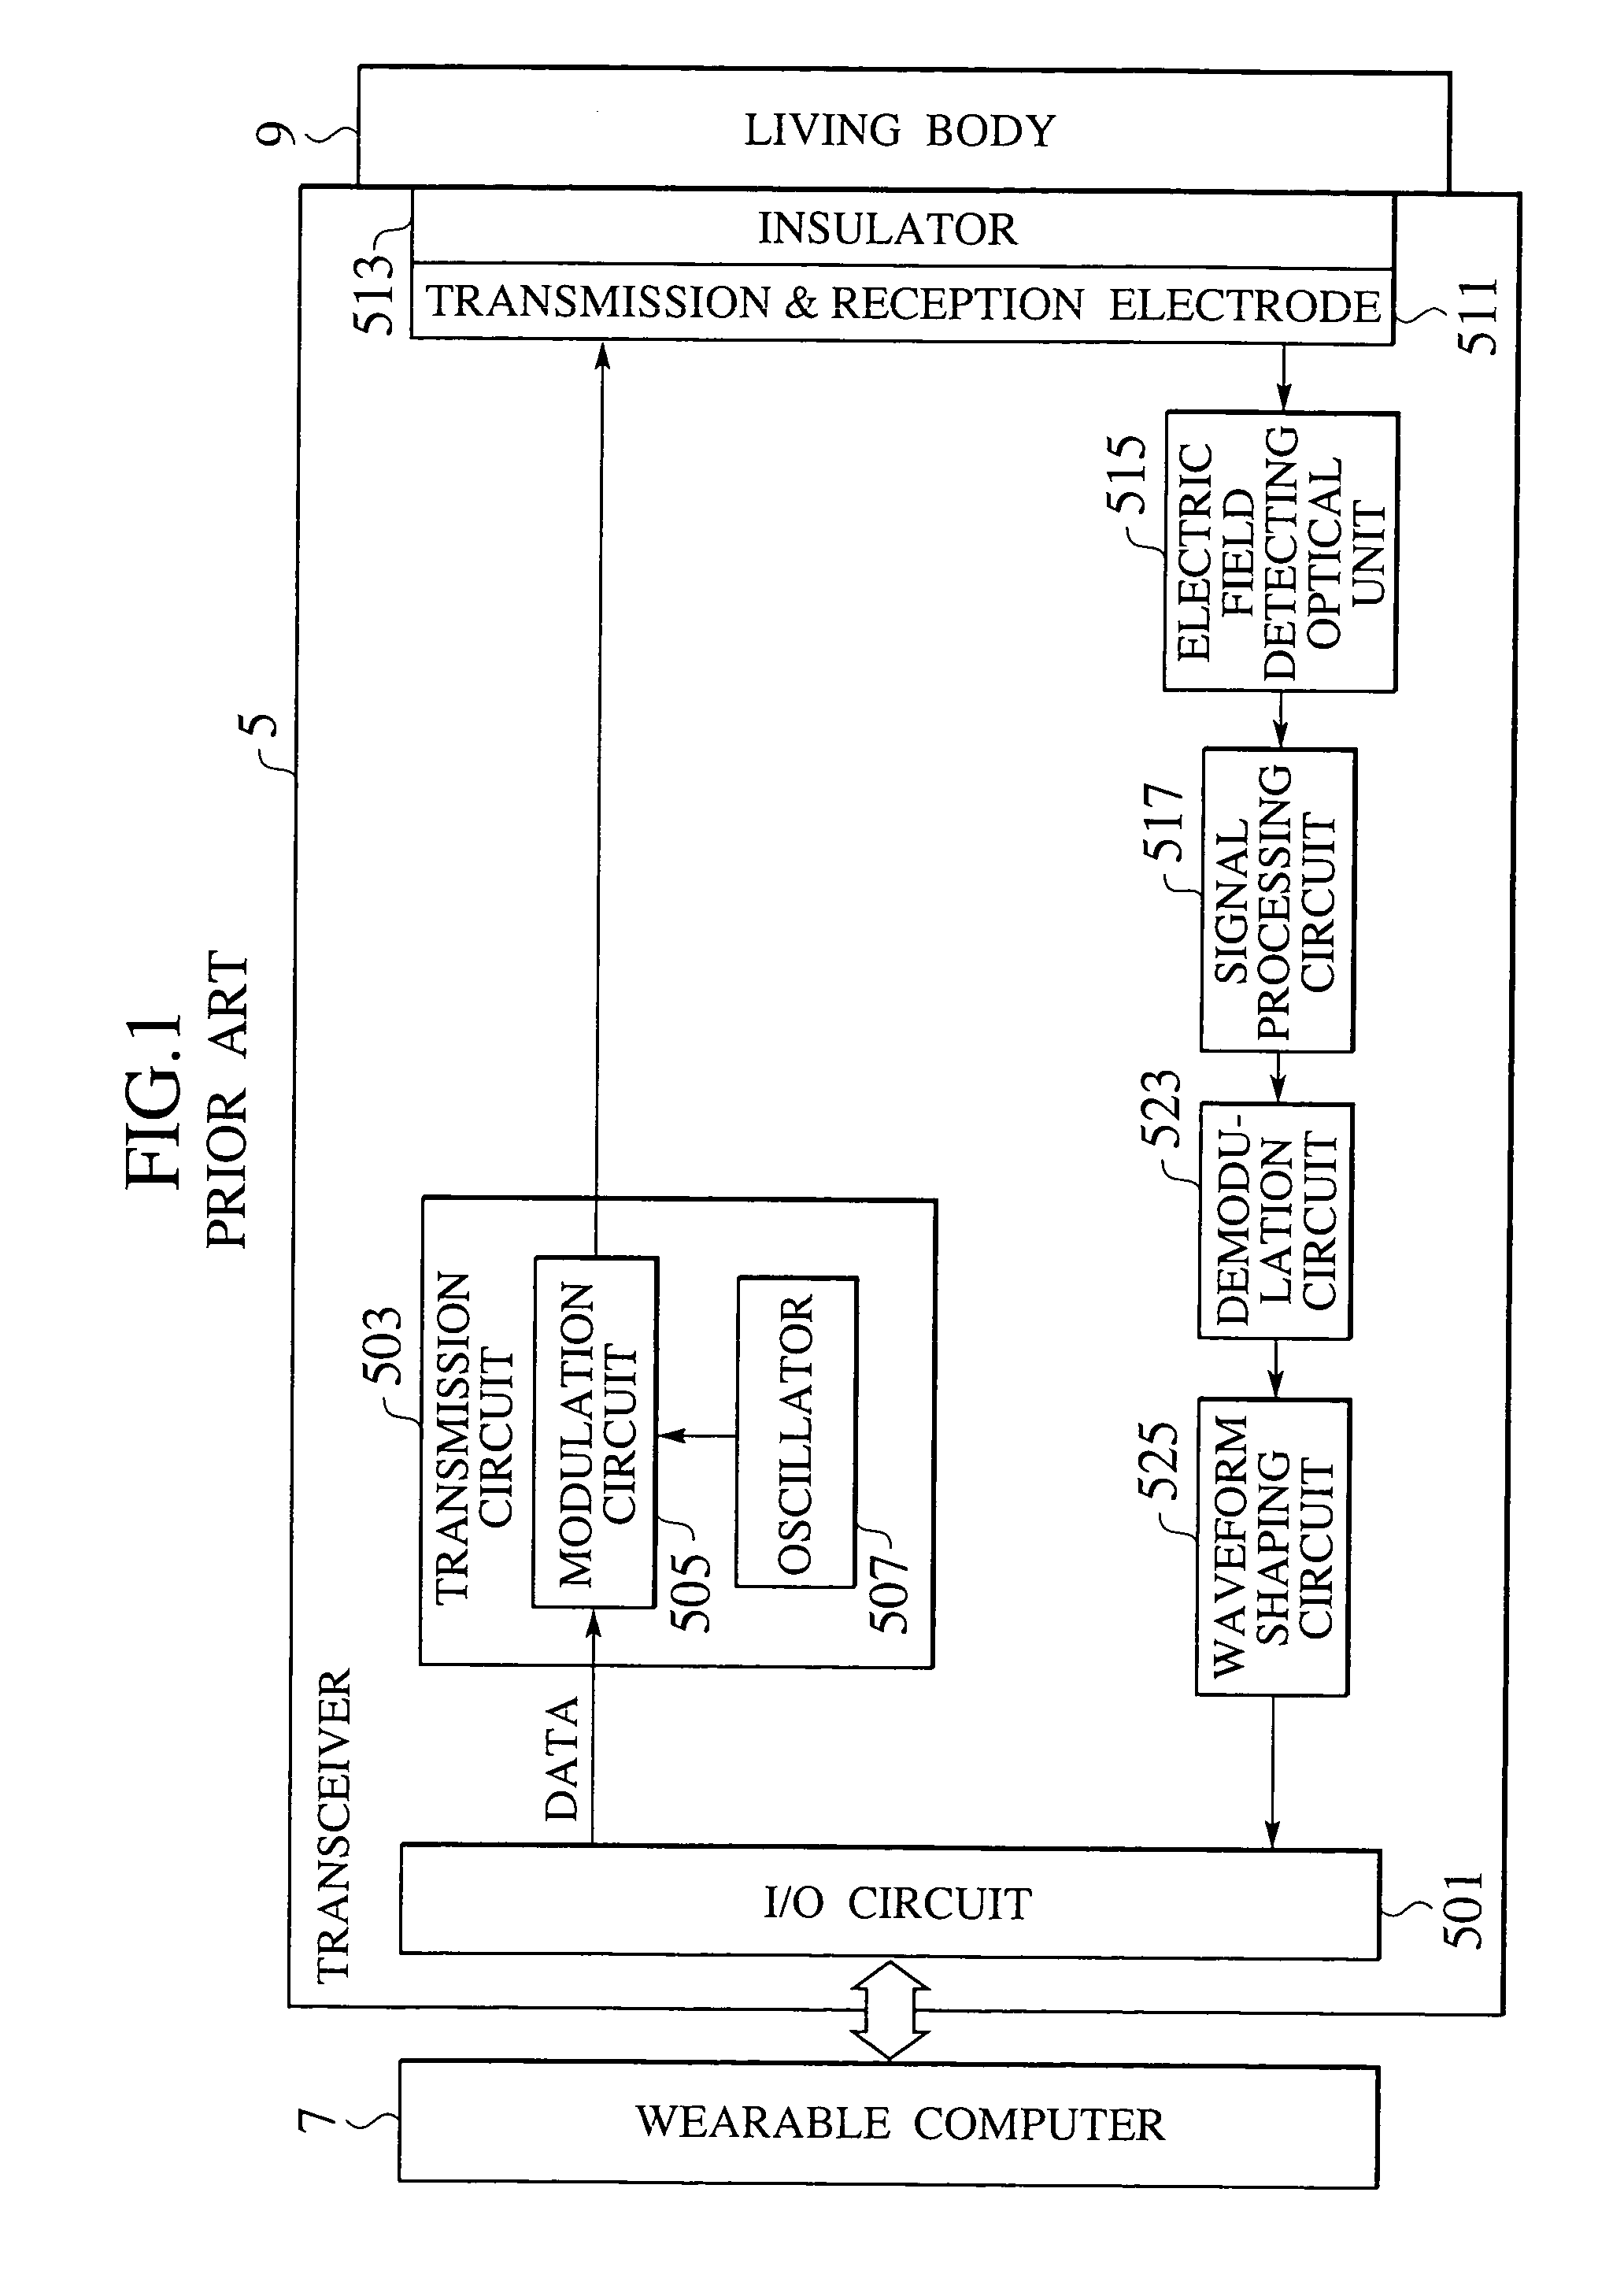 Transceiver capable of causing series resonance with parasitic capacitance